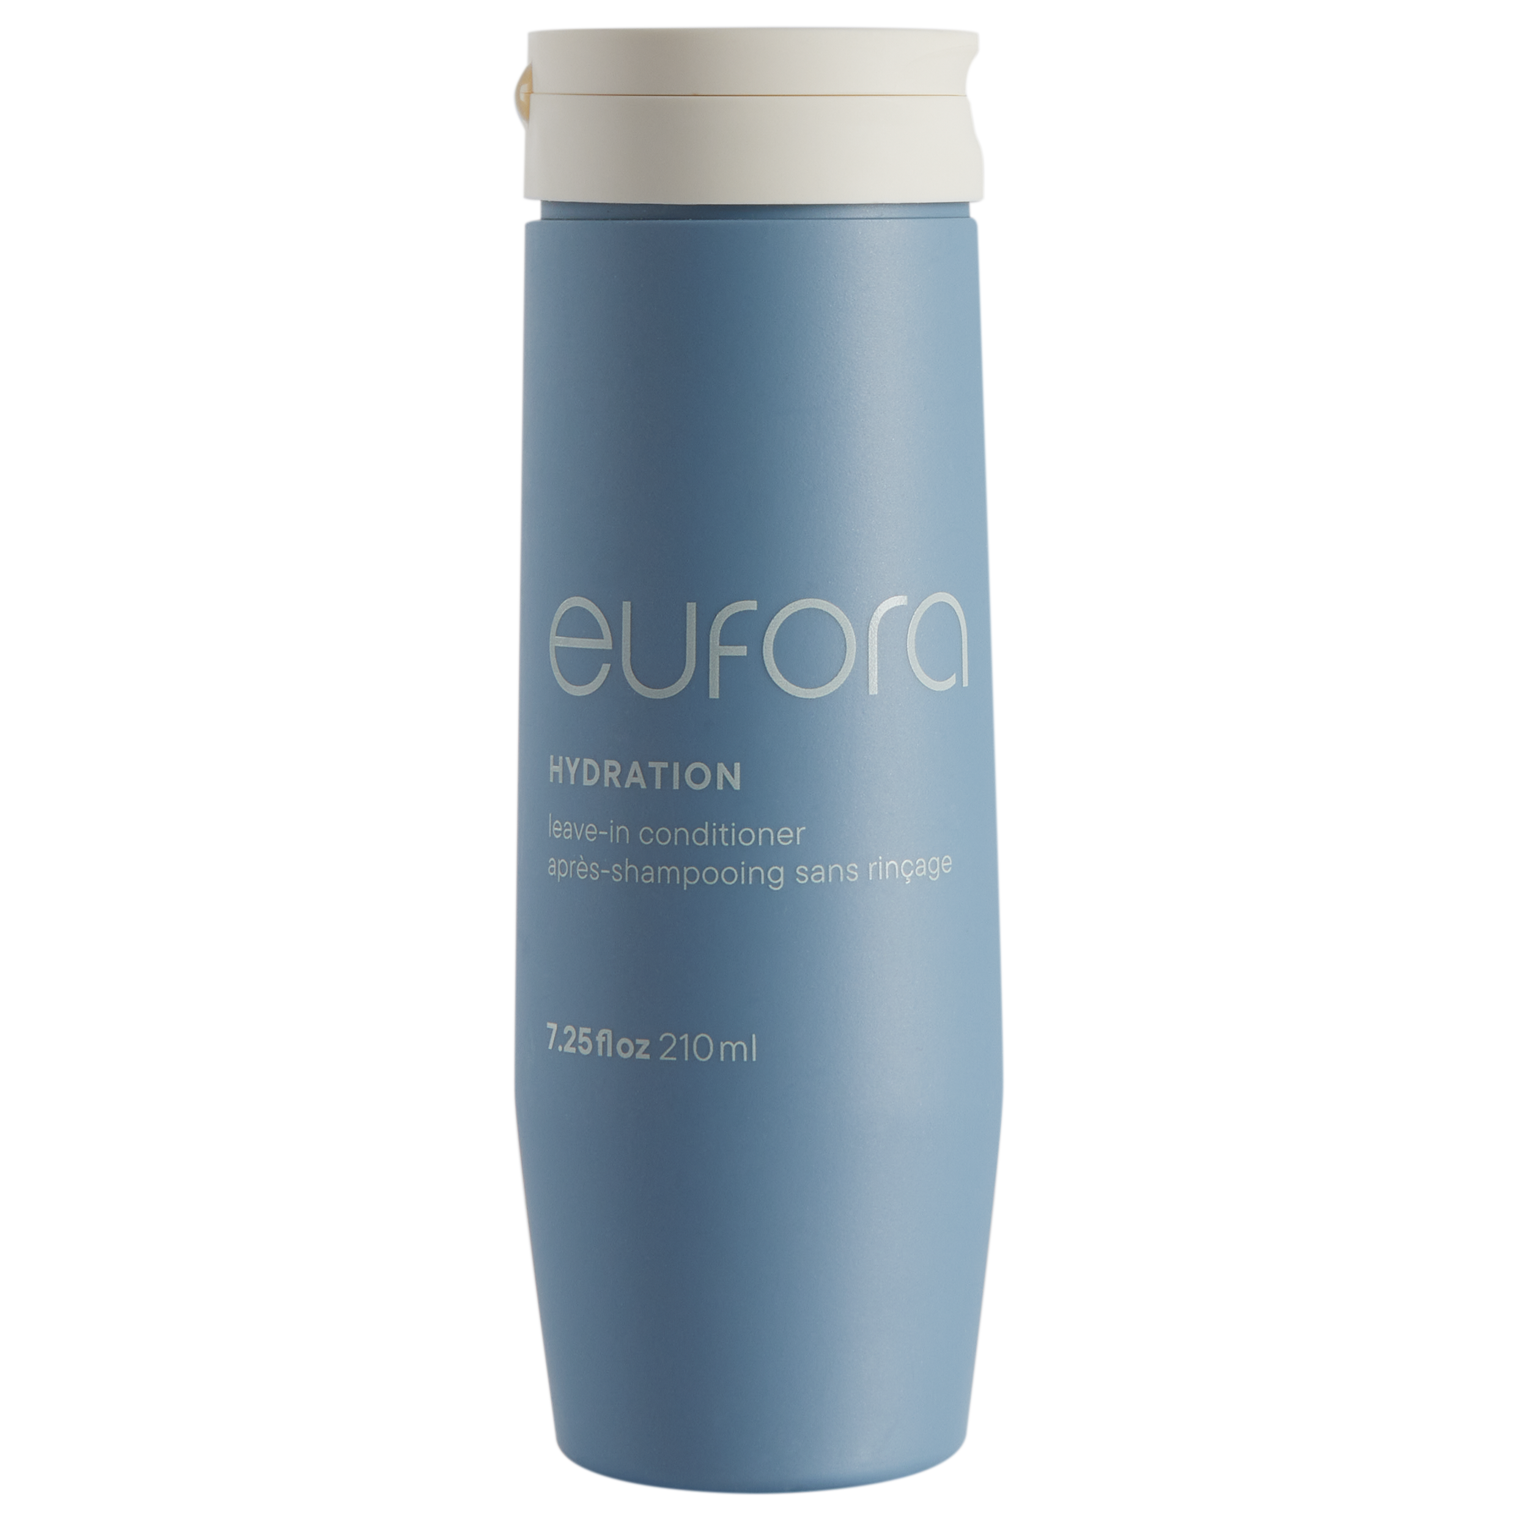 Eufora HYDRATION Leave-In Conditioner